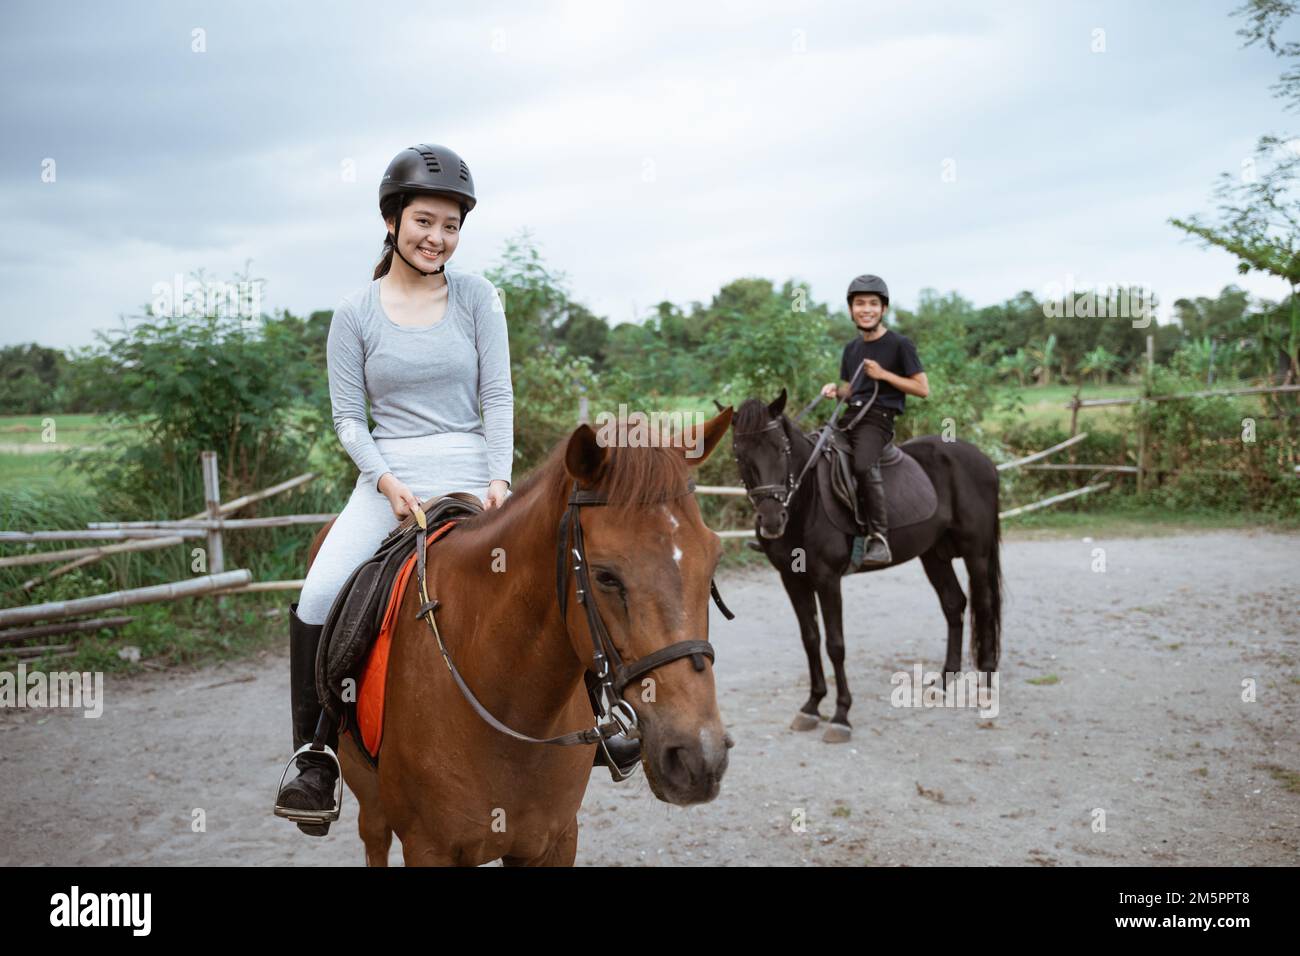 two equestrian athletes ride horses and start training Stock Photo